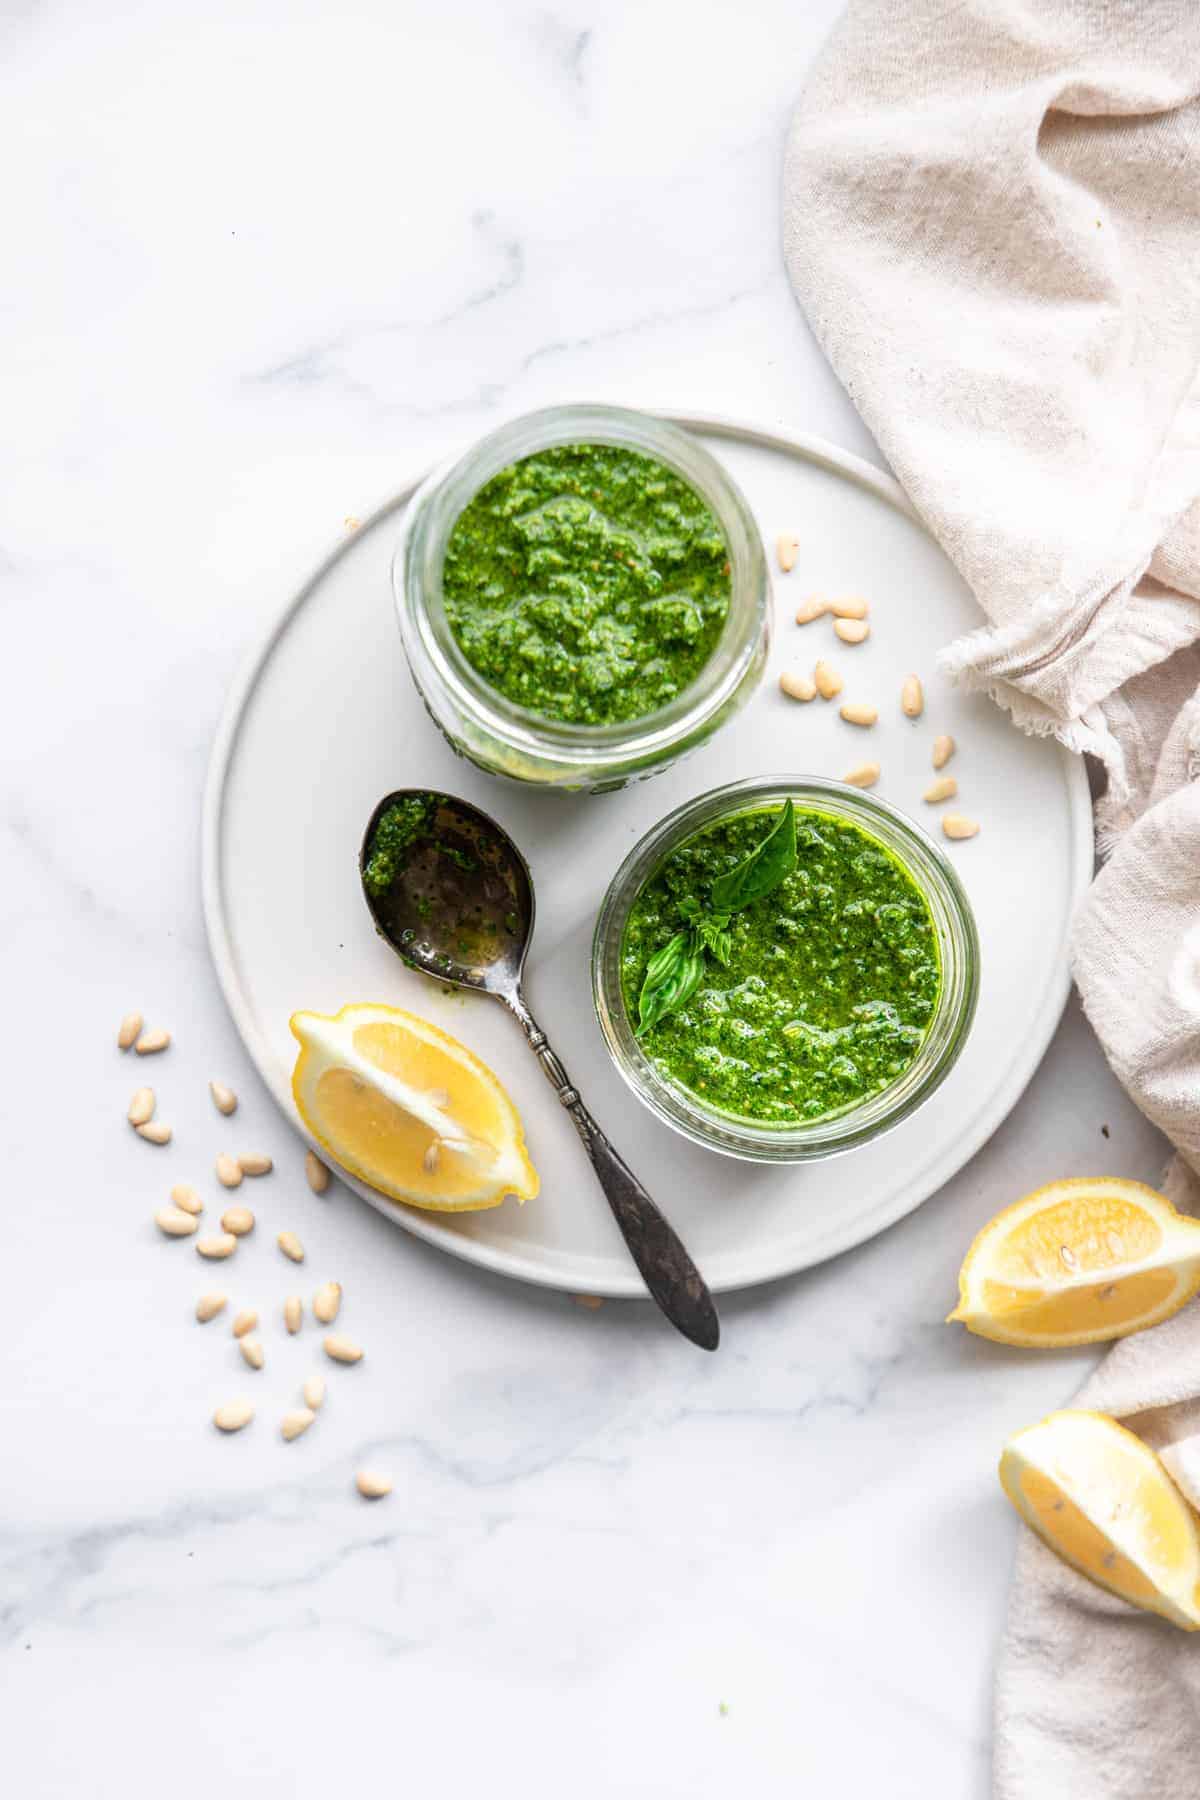 Spinach pesto sauce overview on a serving plate with lemon and a spoon